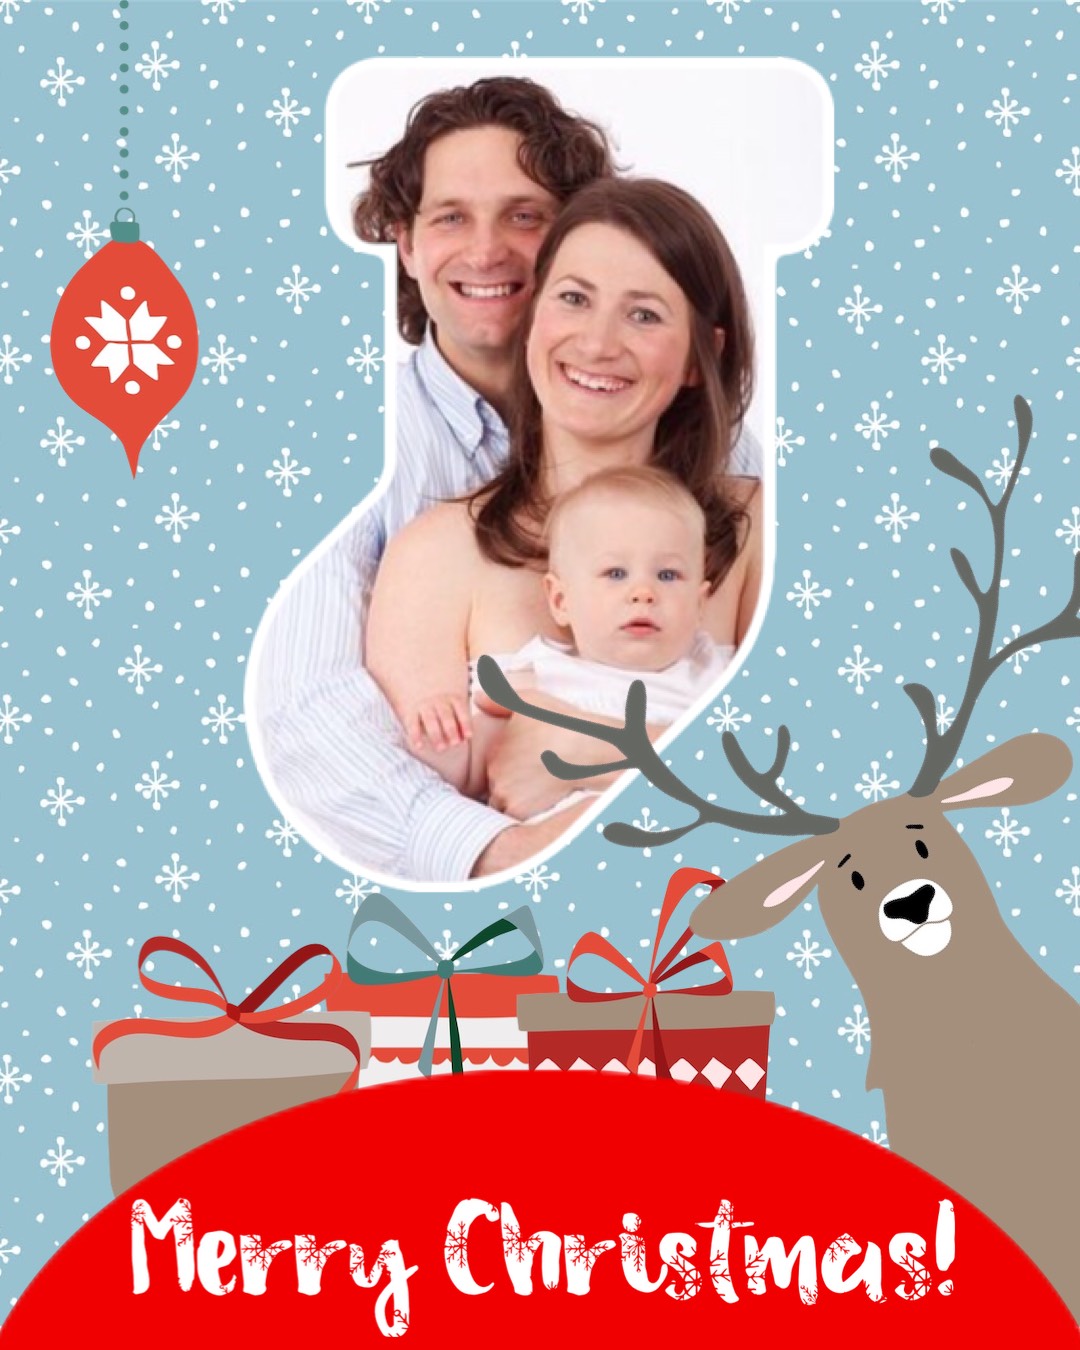 A Christmas Card With A Photo Of A Man And A Woman Holding A Baby Template